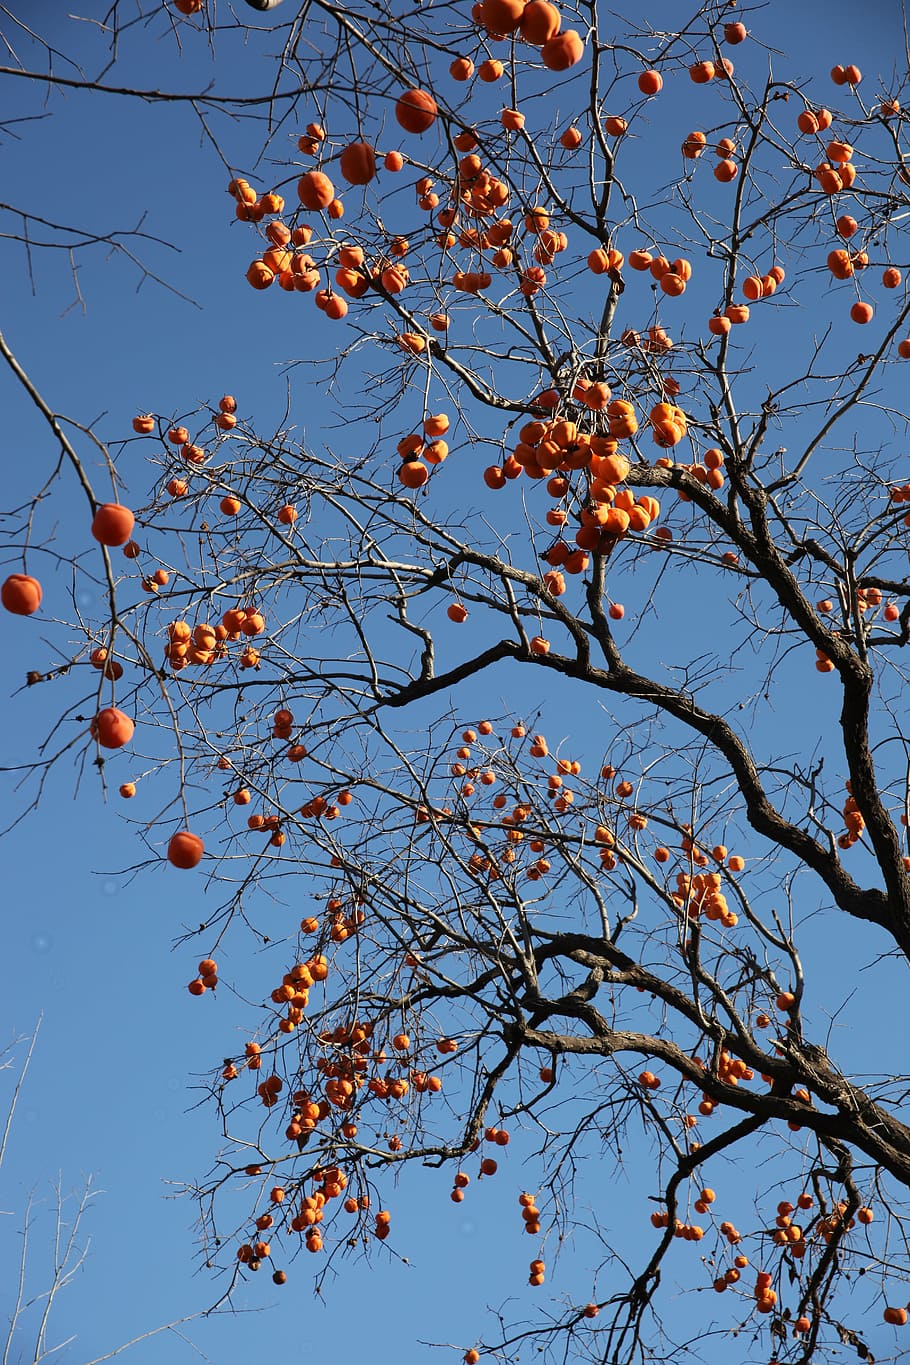 the persimmon tree, fruit trees, fruits, sky, low angle view